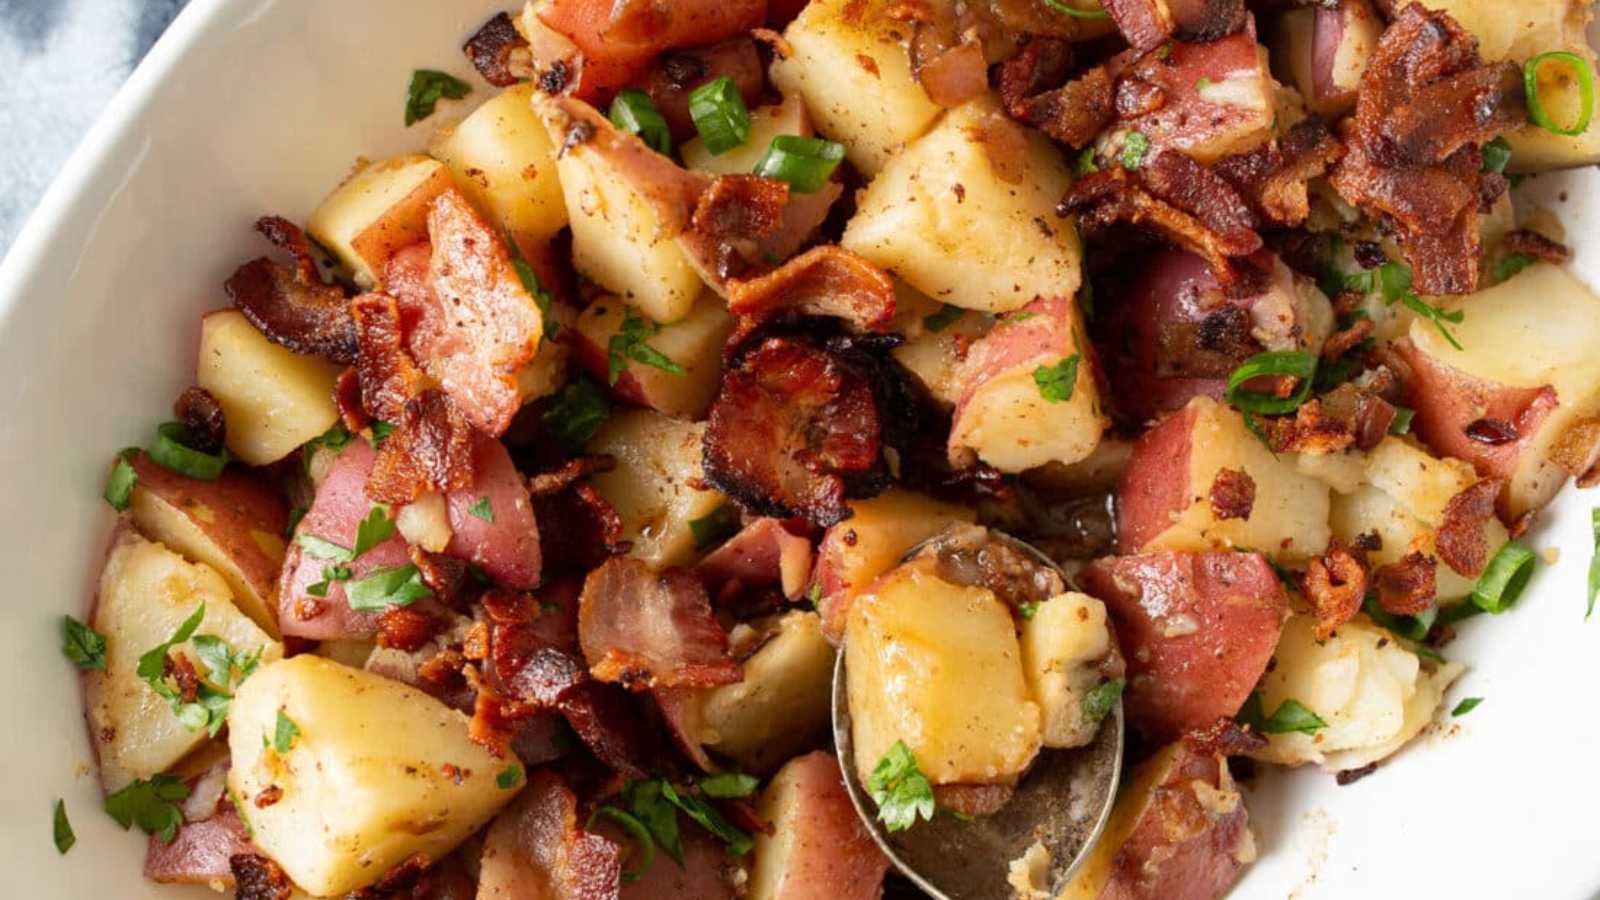 German potato salad featuring red potatoes, purple onions, and bacon in a white bowl.